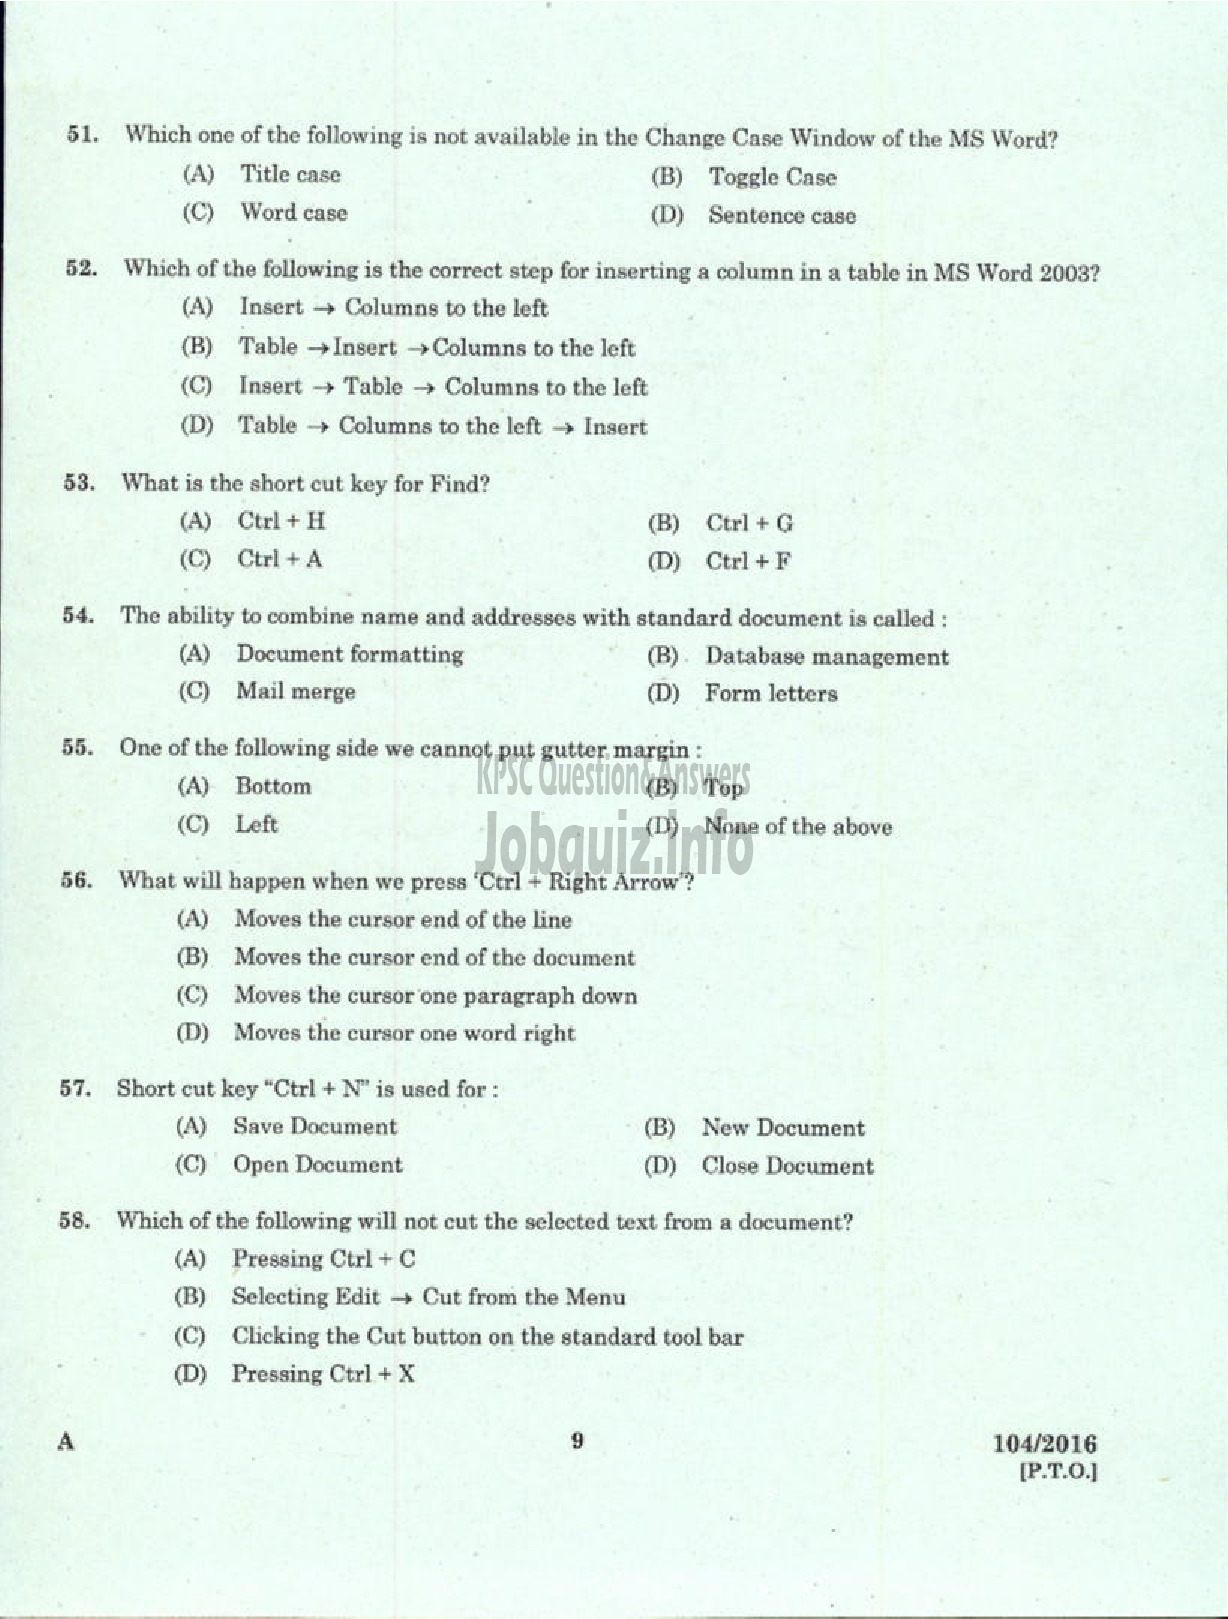 Kerala PSC Question Paper - CONFIDENTIAL ASSISTANT GR II VARIOUS/ GOVT OWNED COMPANY/CORPORATIONS/BOARDS-7